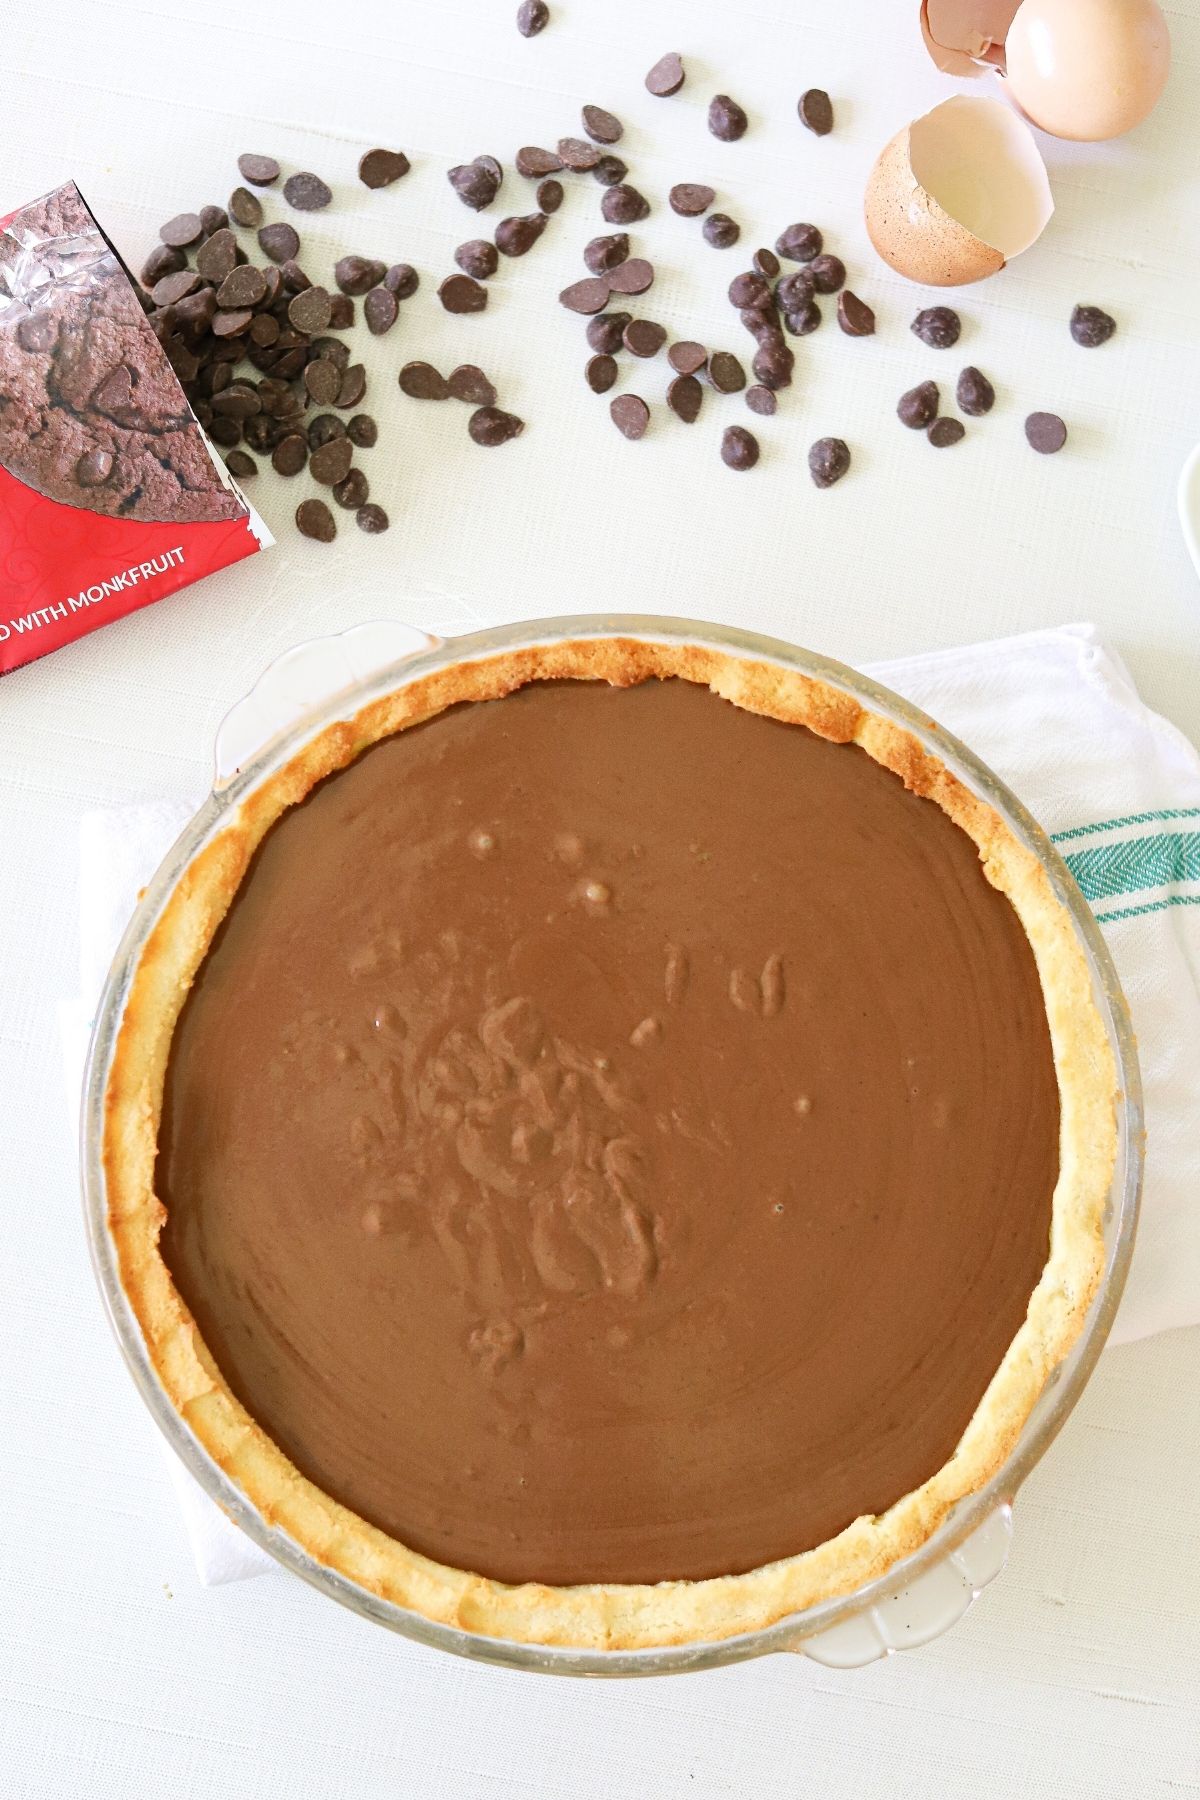 Sugar free chocolate custard poured into a baked pie crust